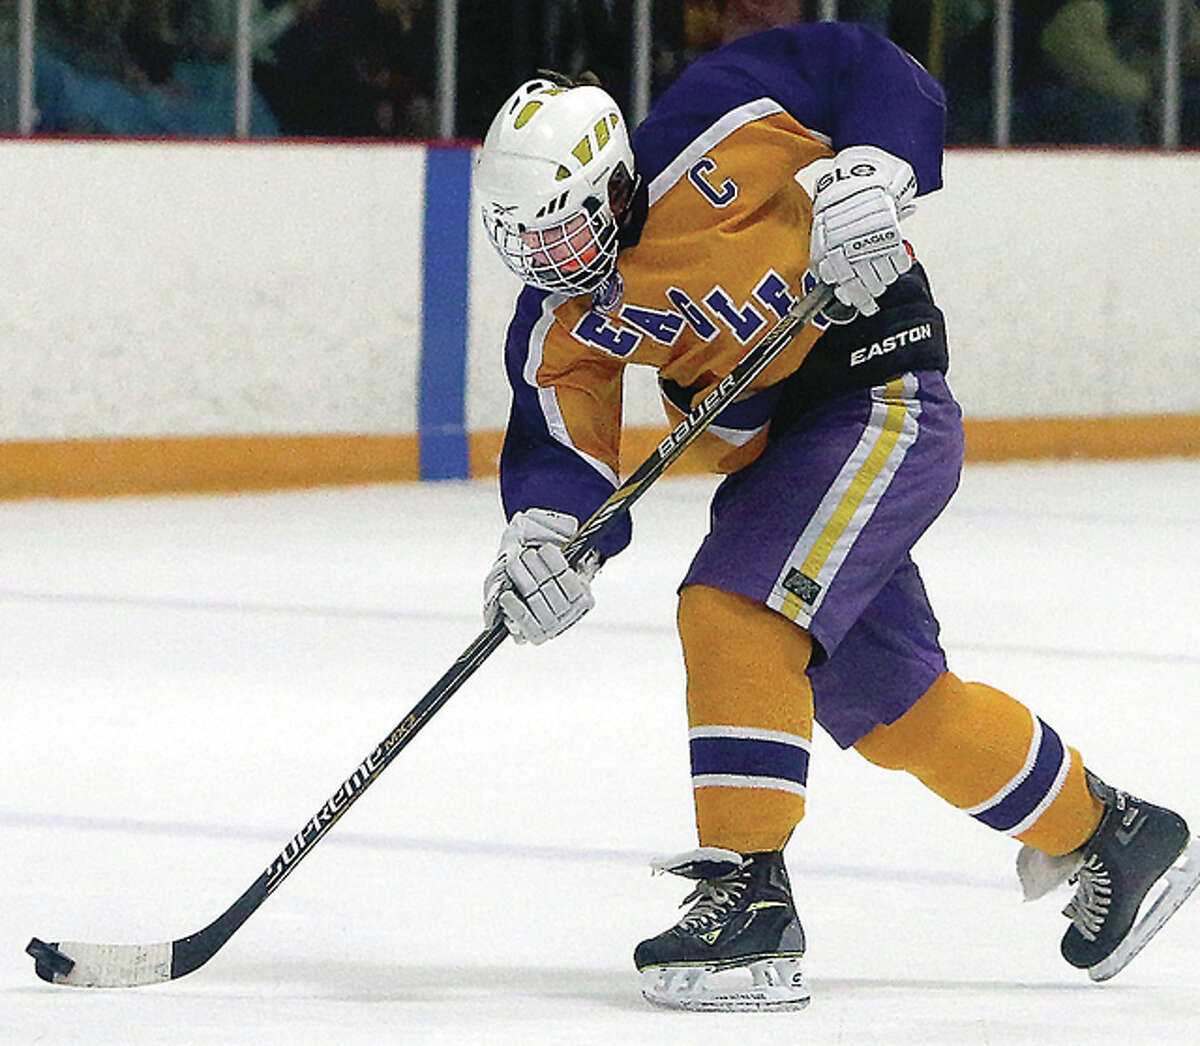 Bethalto captain Jacoby Robinson takes a shot in a recent MVCHA game at the East Alton Ice Arena. He and his teammates completed a sweep of Granite City with a 4-2 win Tuesday.